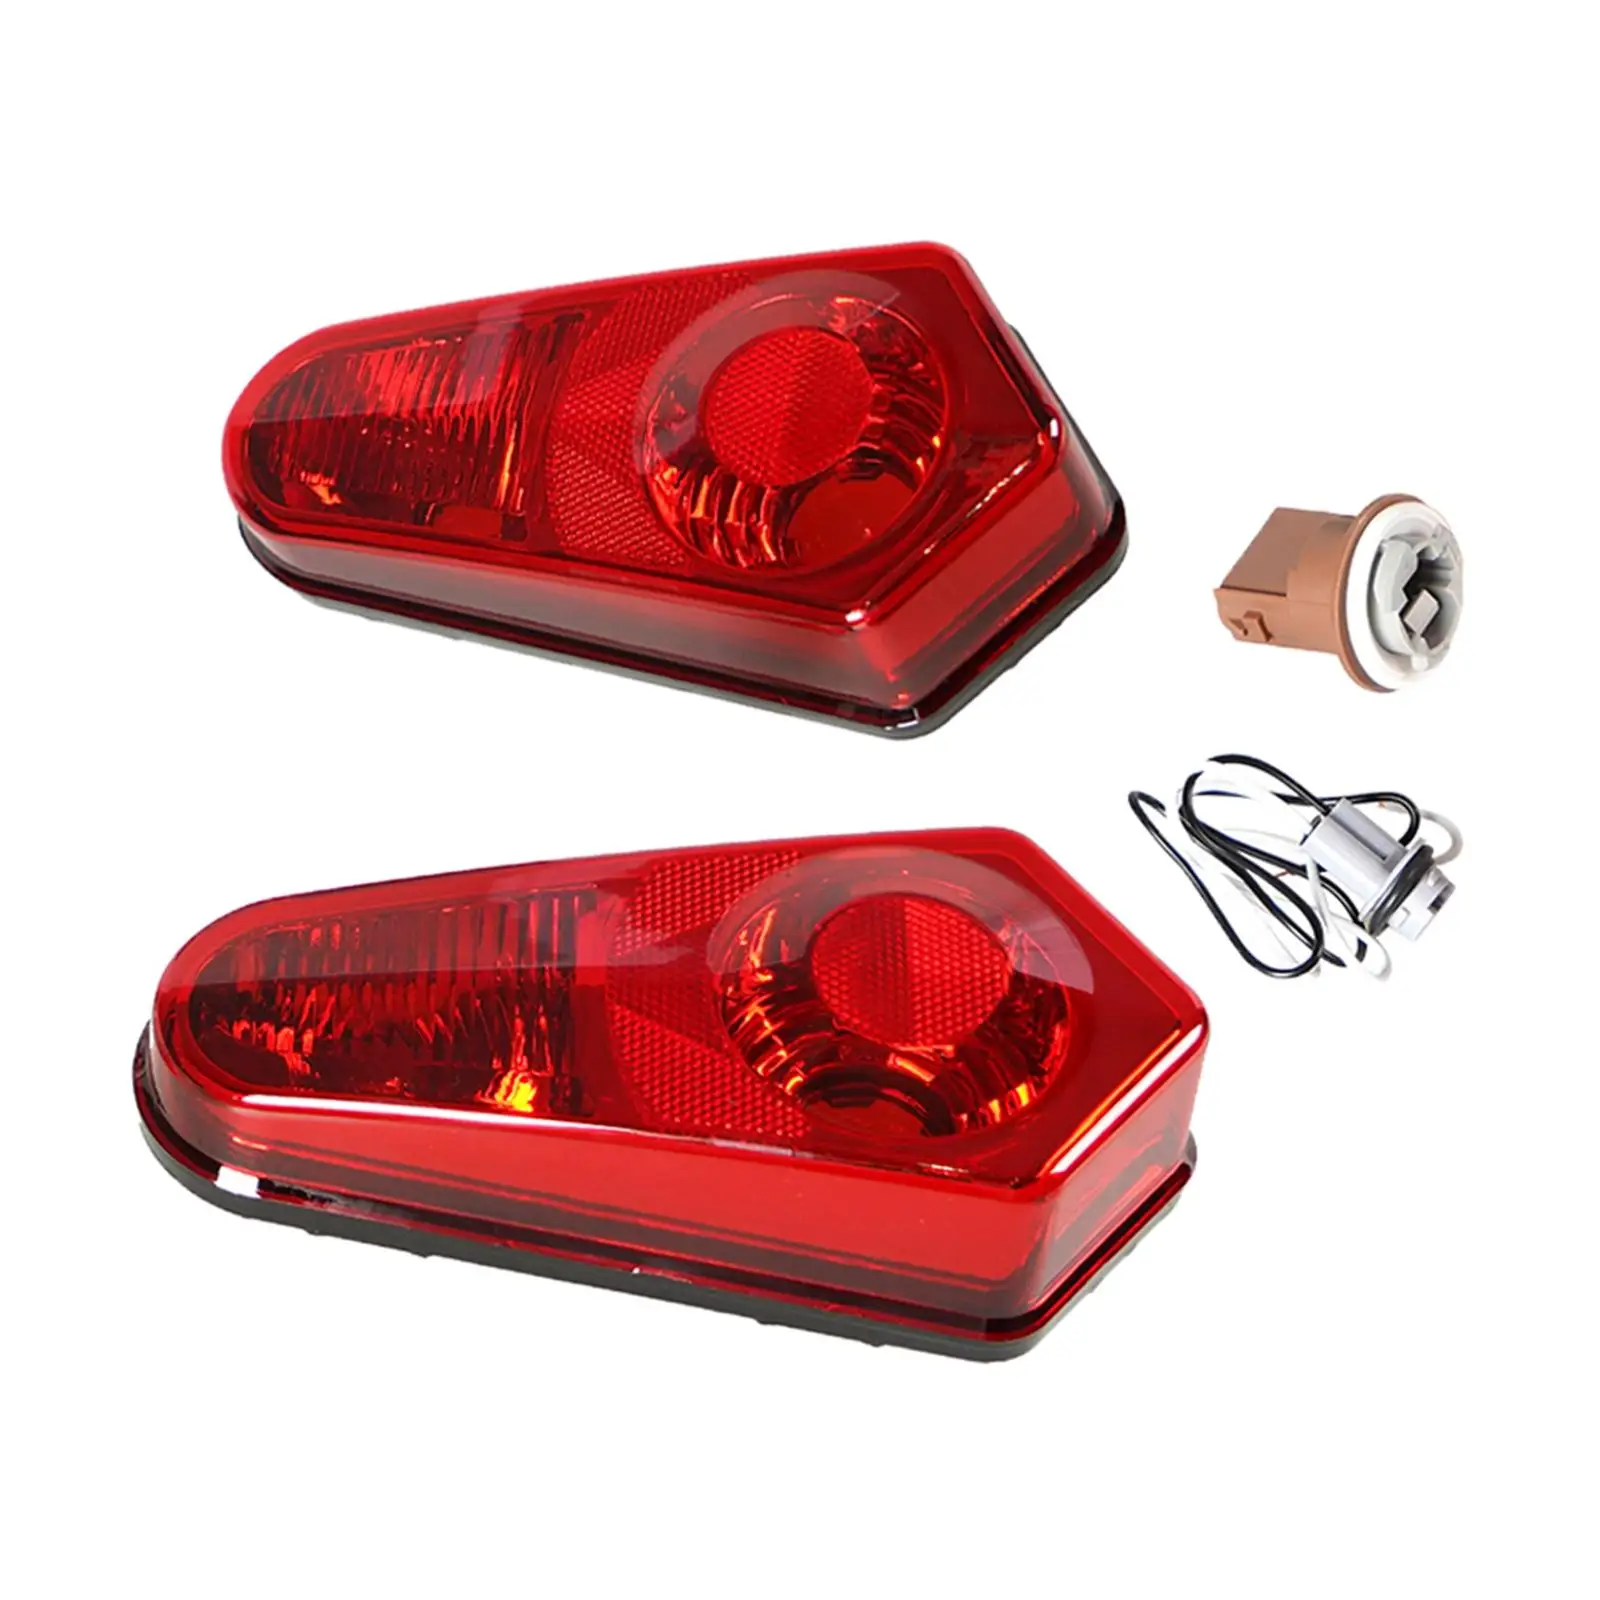 LED Tail Light Lamp for 500 05-13 Replacement 2411154